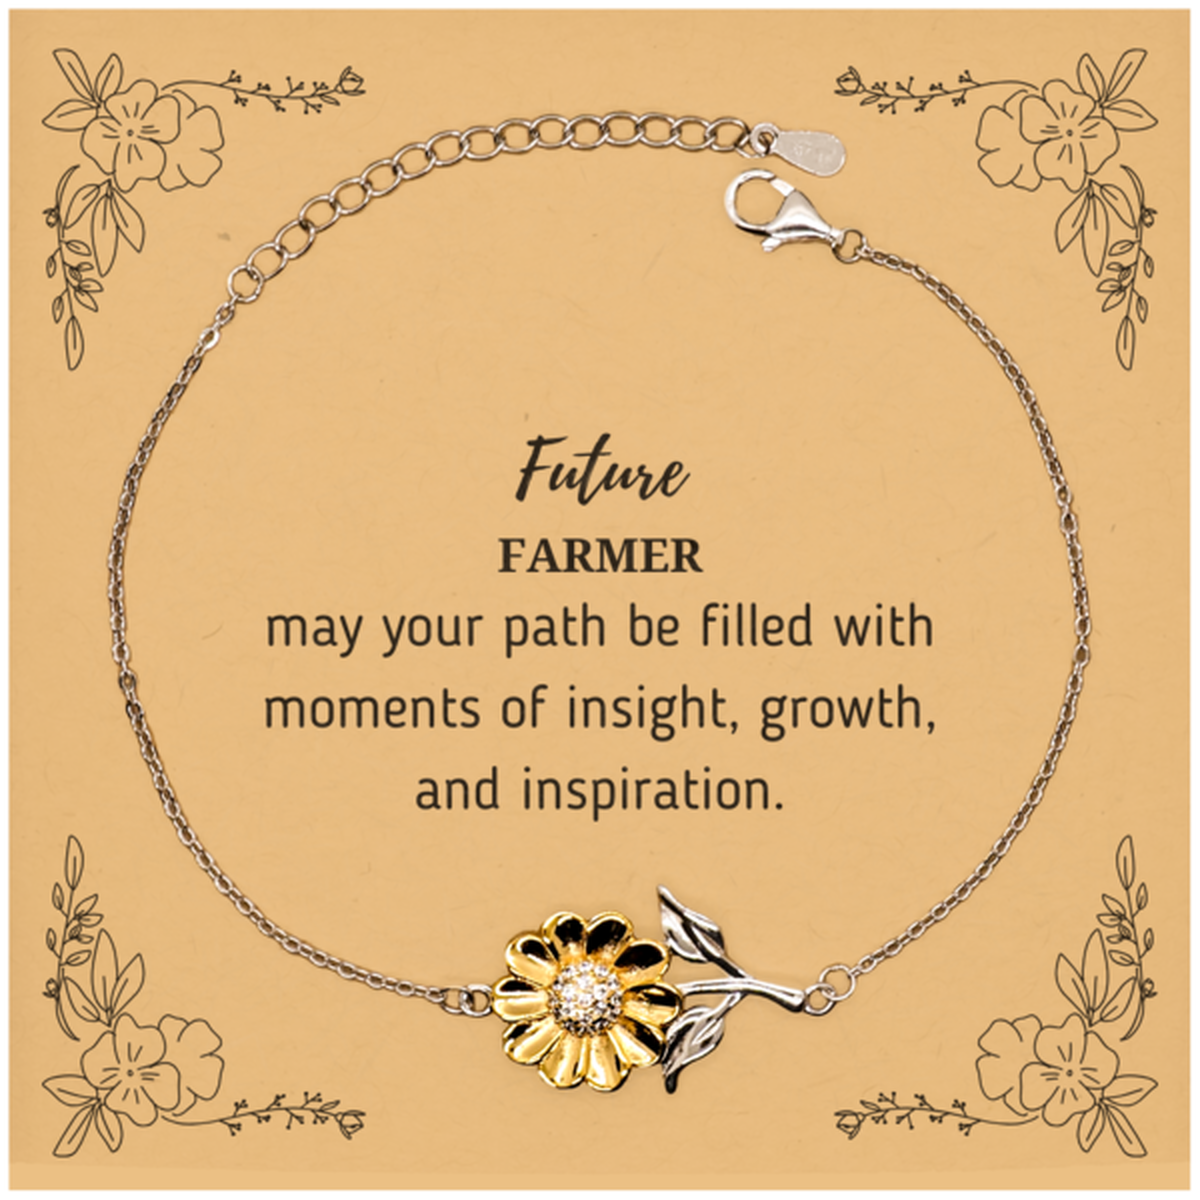 Future Farmer Gifts, May your path be filled with moments of insight, Graduation Gifts for New Farmer, Christmas Unique Sunflower Bracelet For Men, Women, Friends